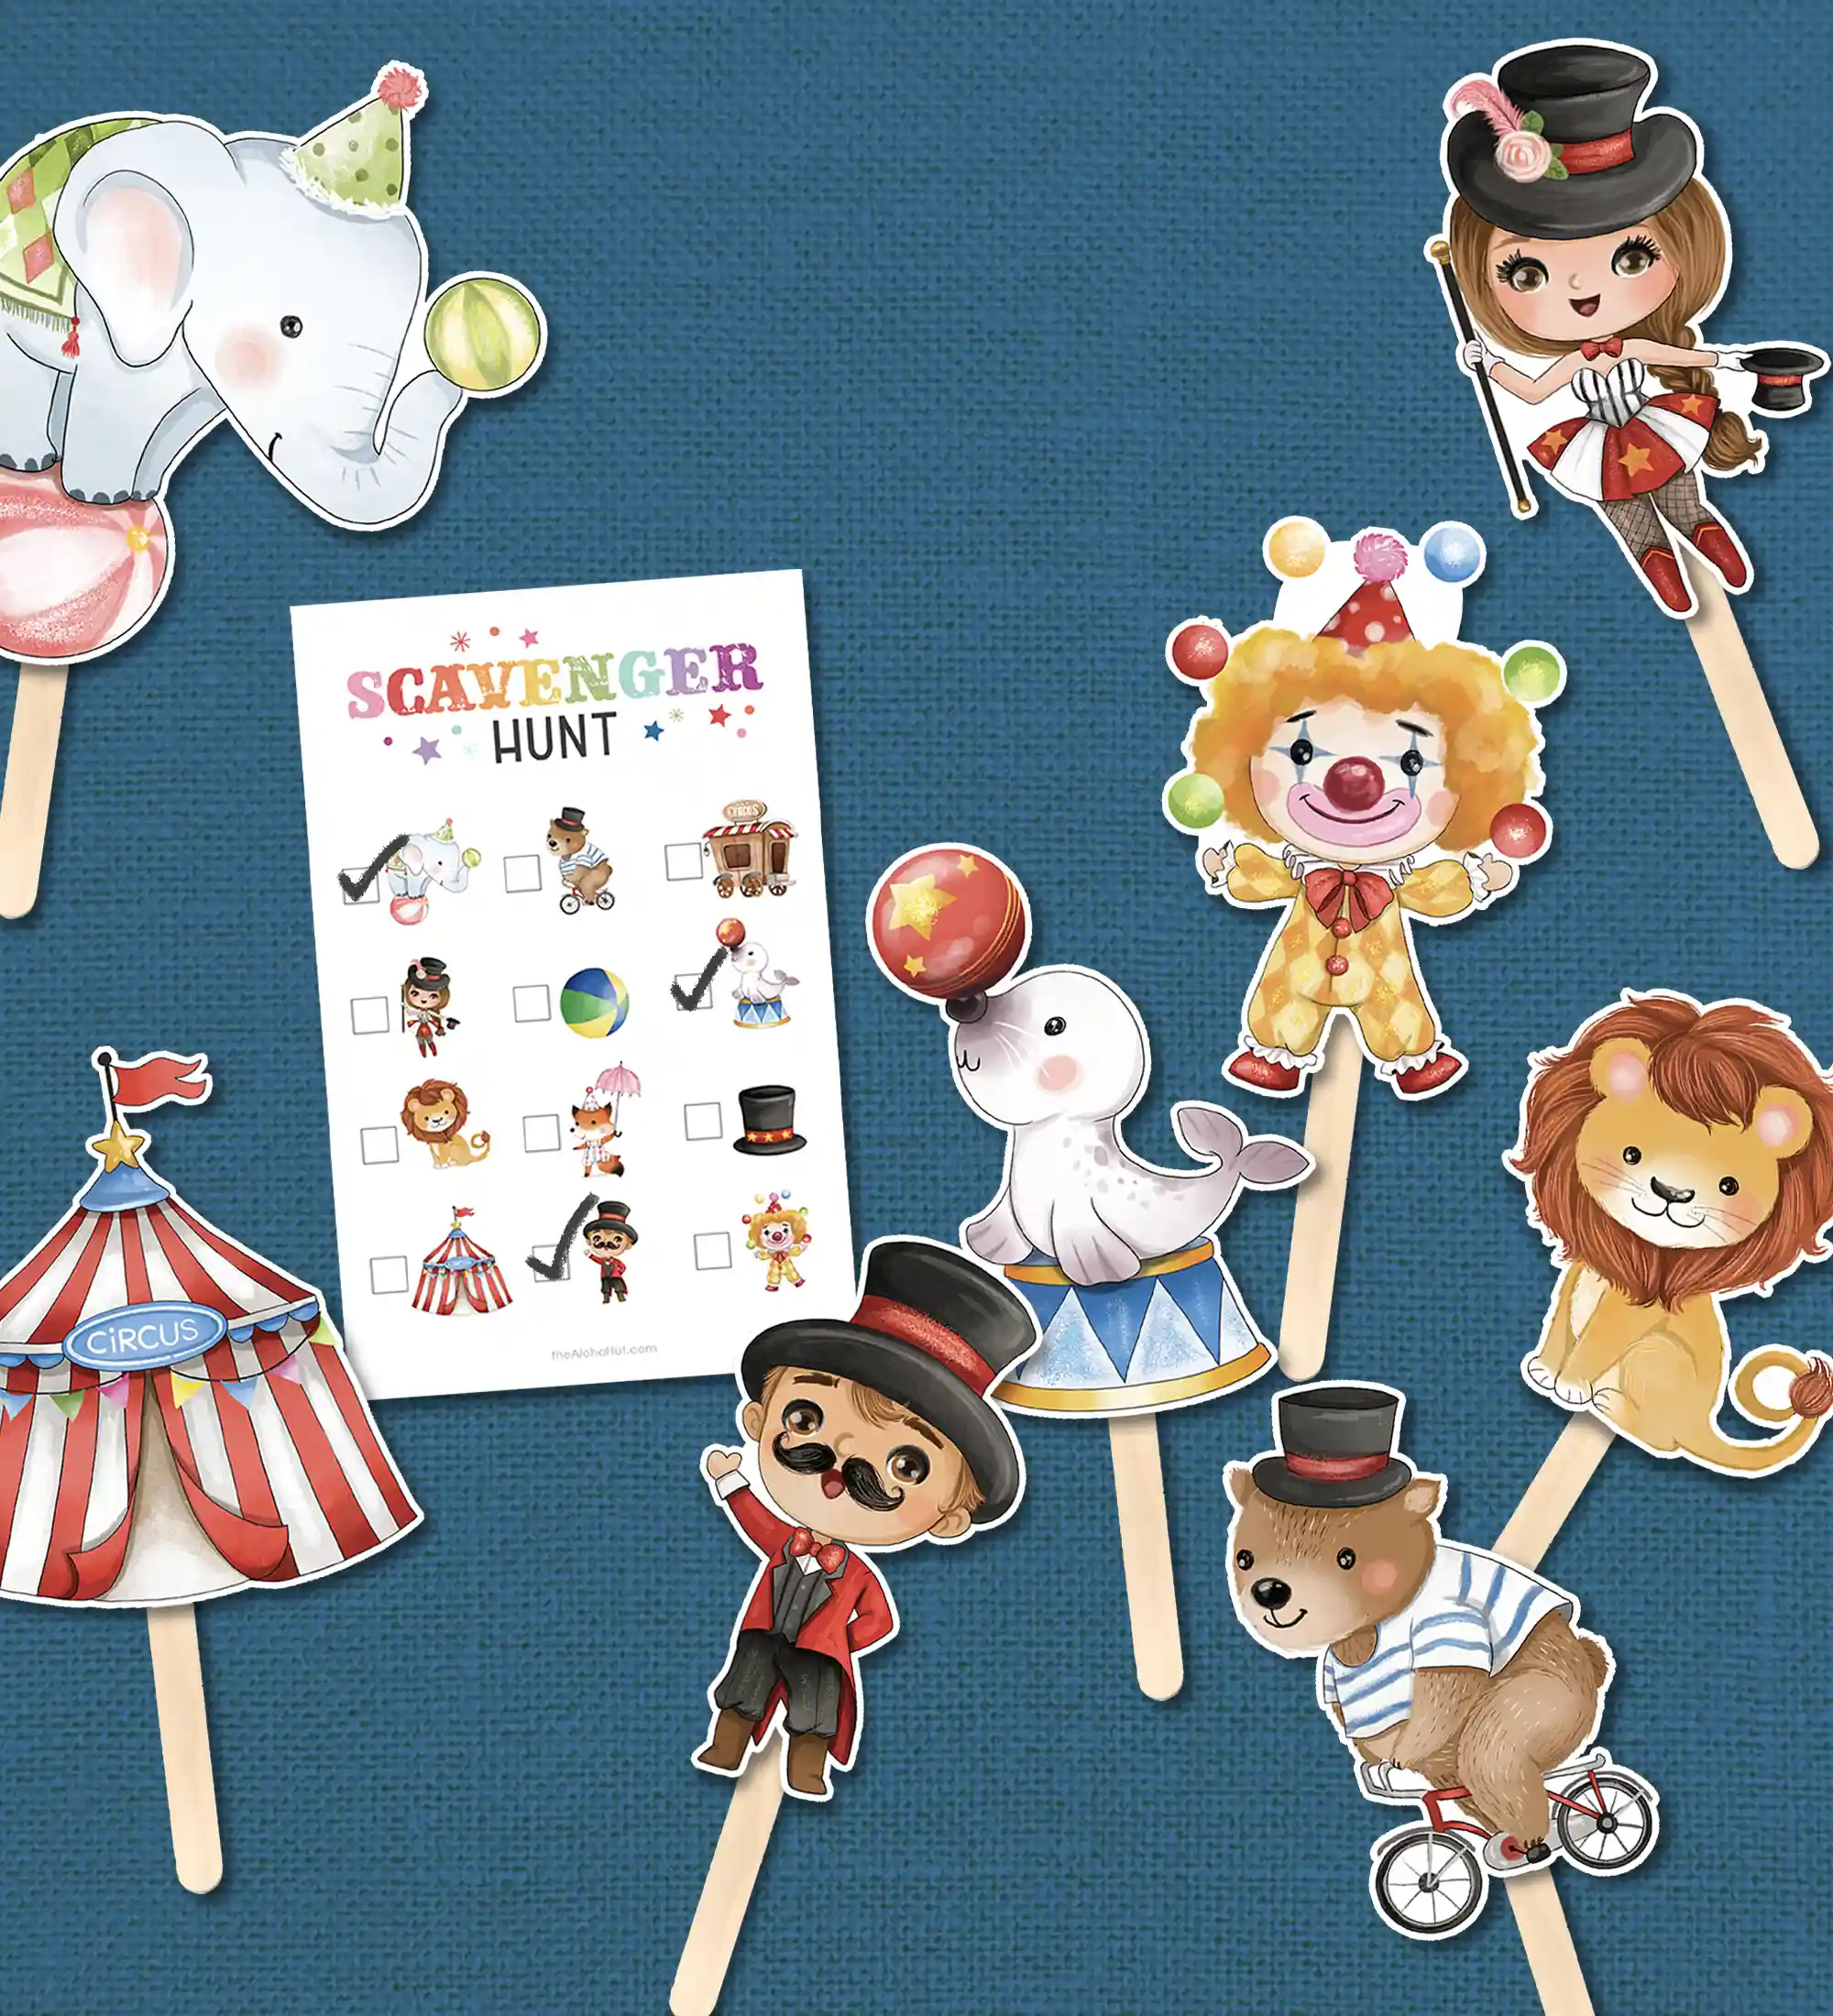 Scavenger hunt game for carnival party or circus party. Get the printable characters and instructions for playing in our shop.